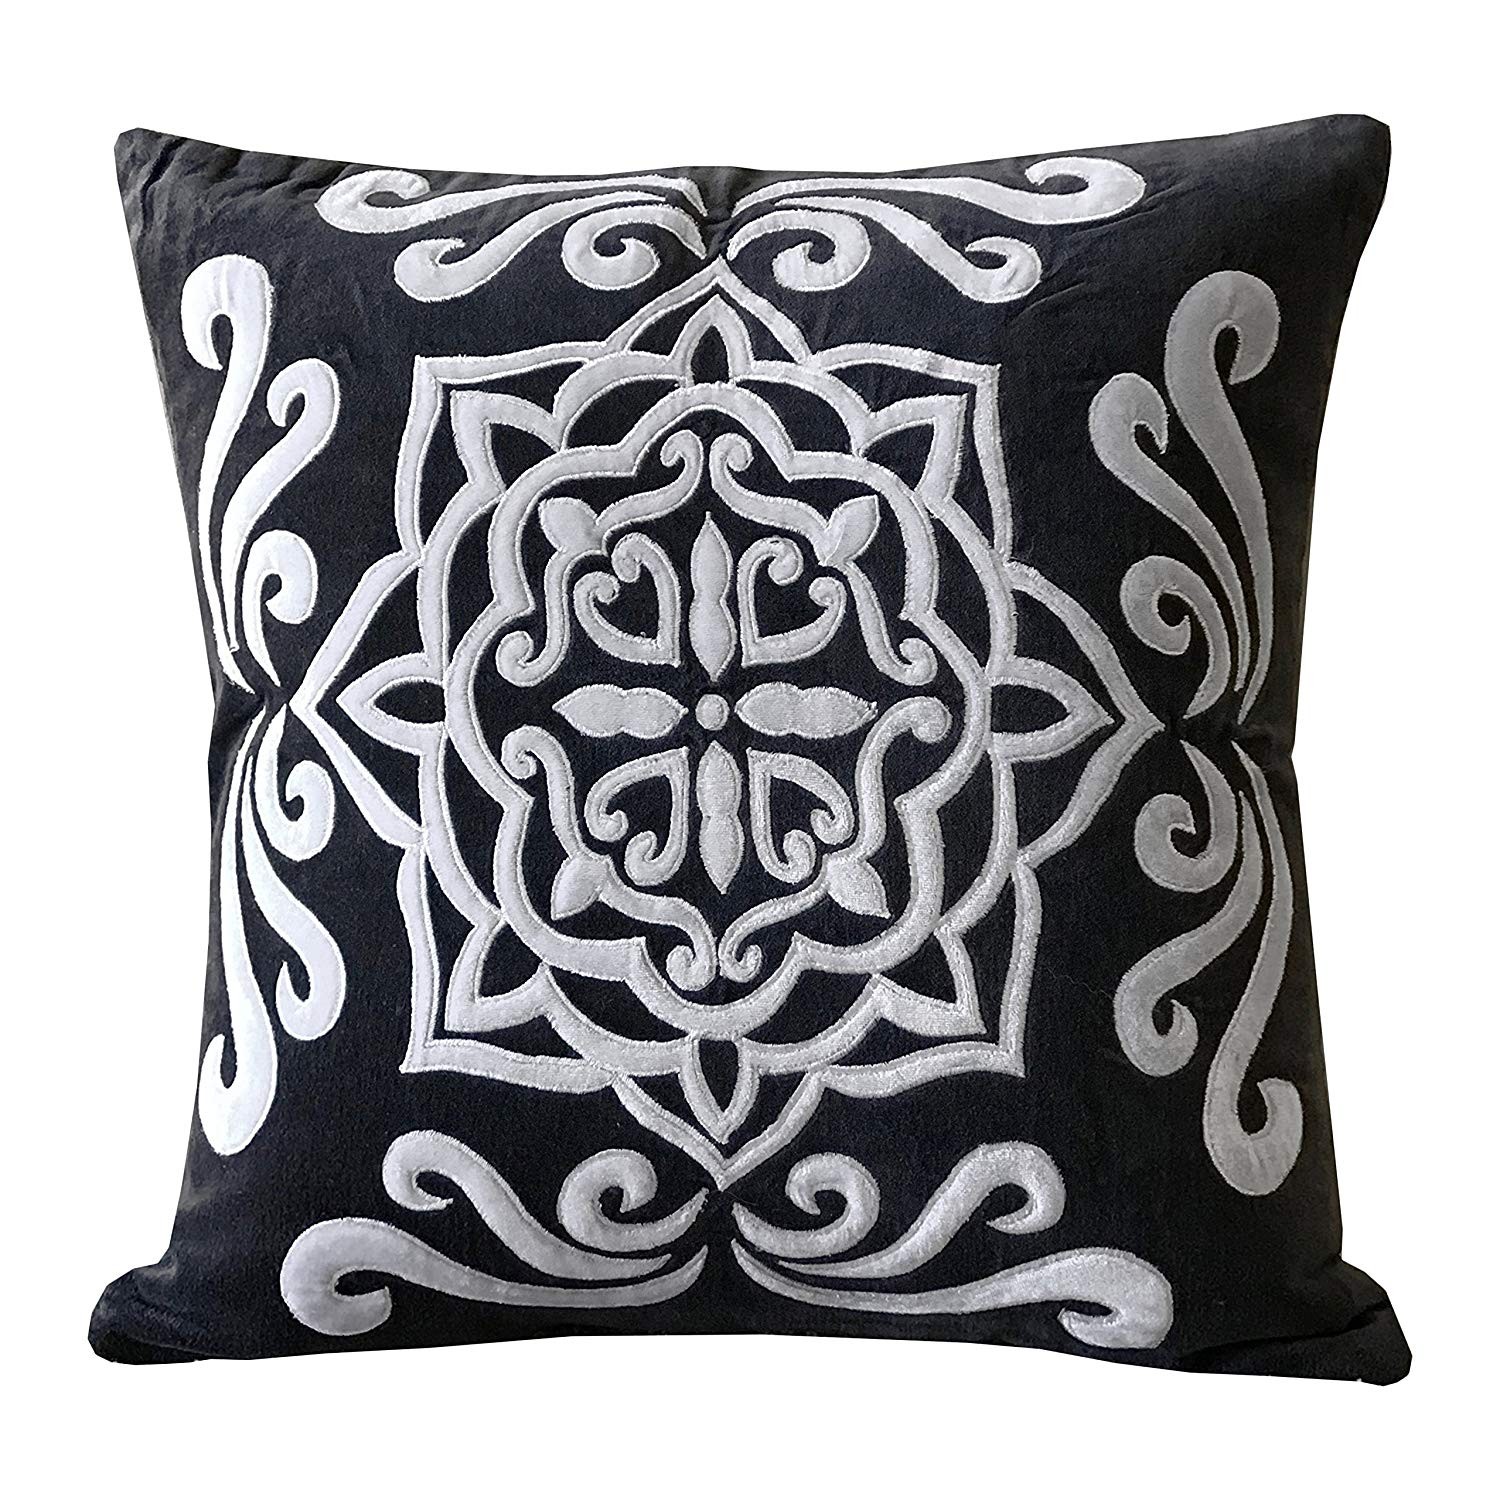 Ldj Cotton Polyester Sofa Chair Seat Rectangle Throw Pillow Case Decorative Cushion Cover Pillowcase Design With Victorian Gothic Lace Skull Custom Pillow Cover Print Double Side Sized 12X20 Inches